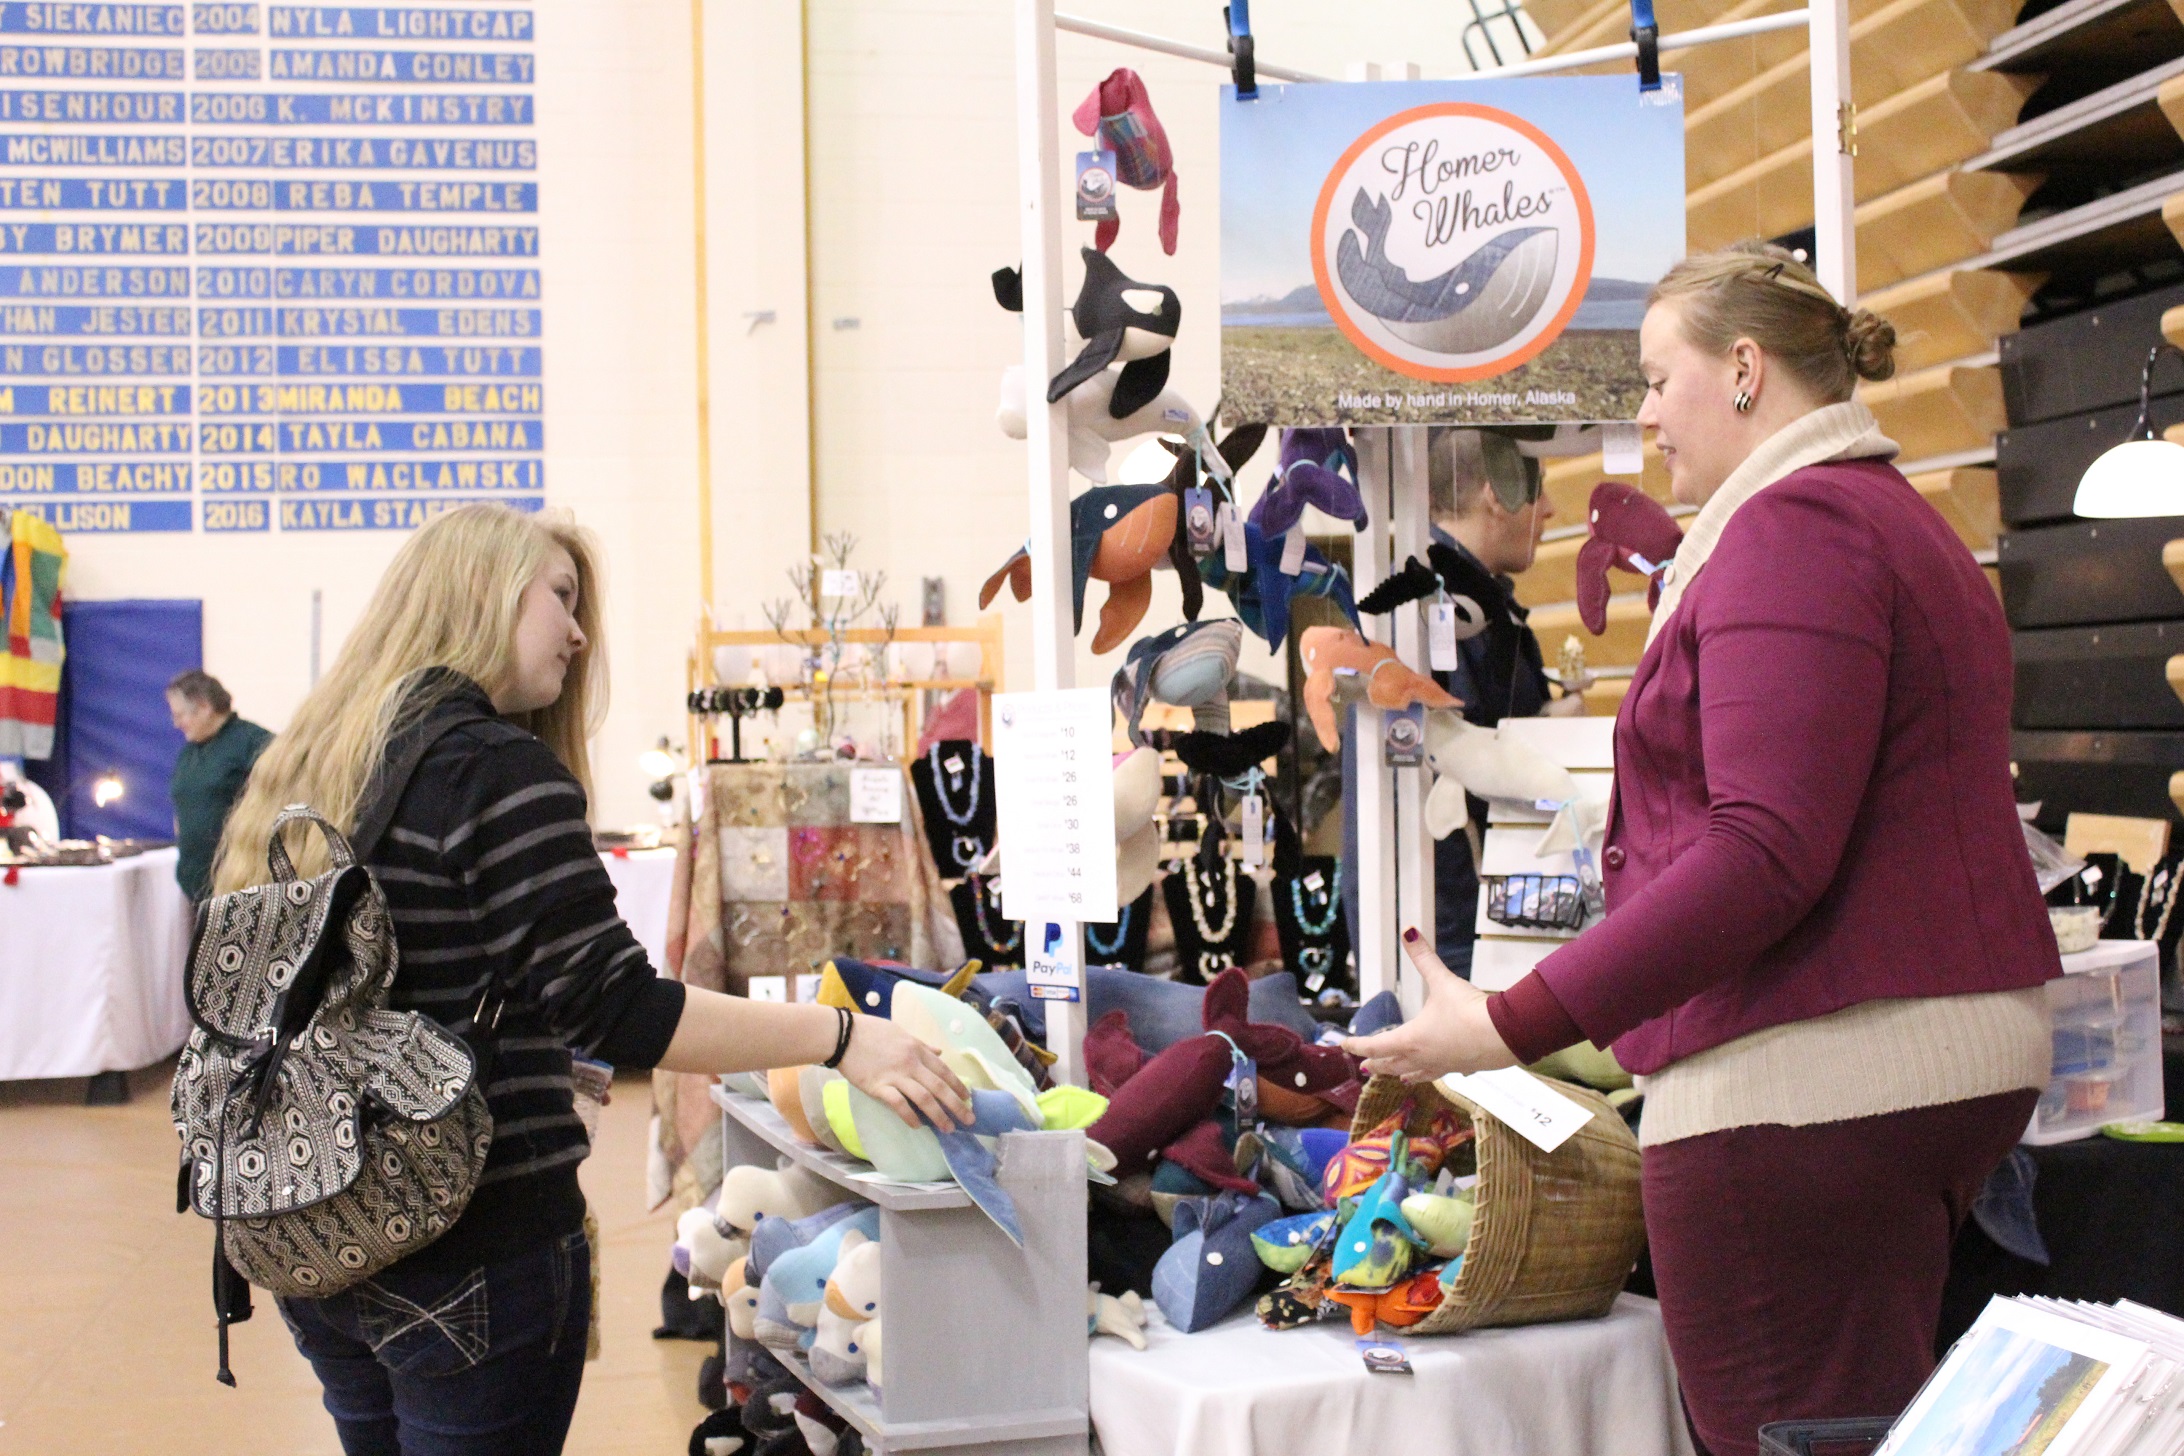 Abagail Kokai talks to a customer about her stuffed denim Homer Whales at the Nutcracker Faire on Saturday, Dec. 3.-Photo by Anna Frost, Homer News